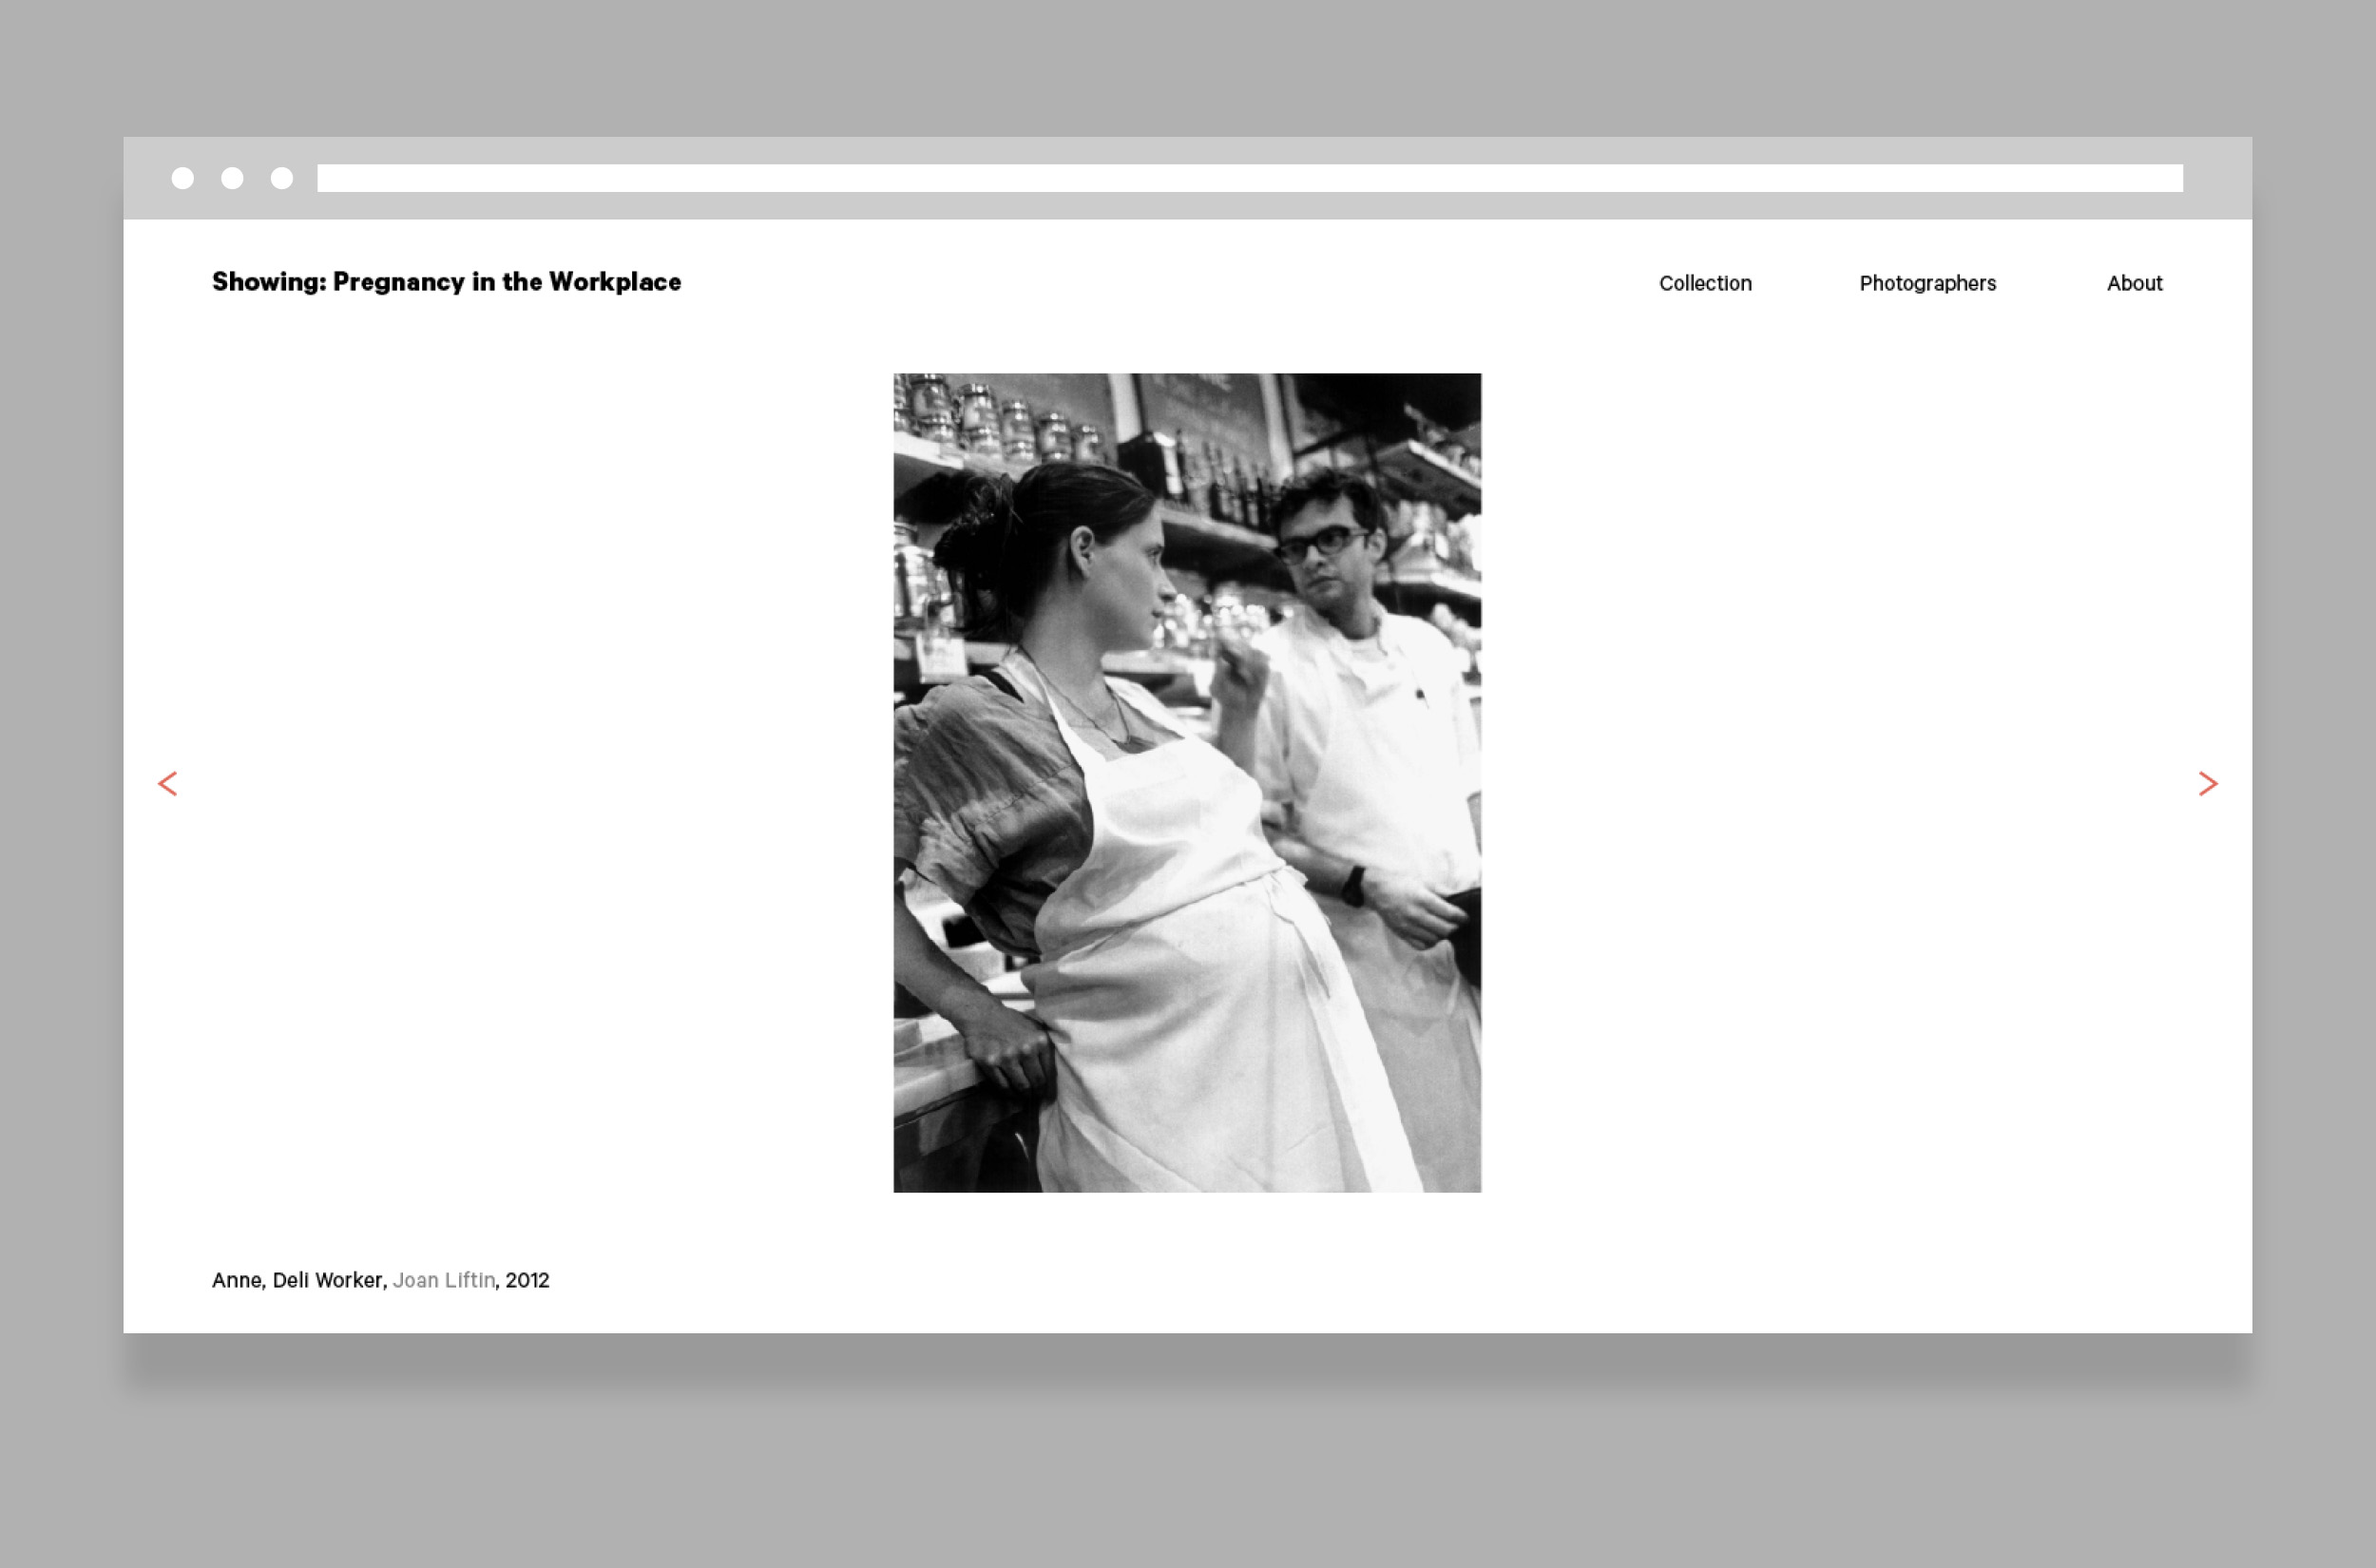 Image depicts a mock-up of a webpage with a photograph of a pregnant person working in cafe.